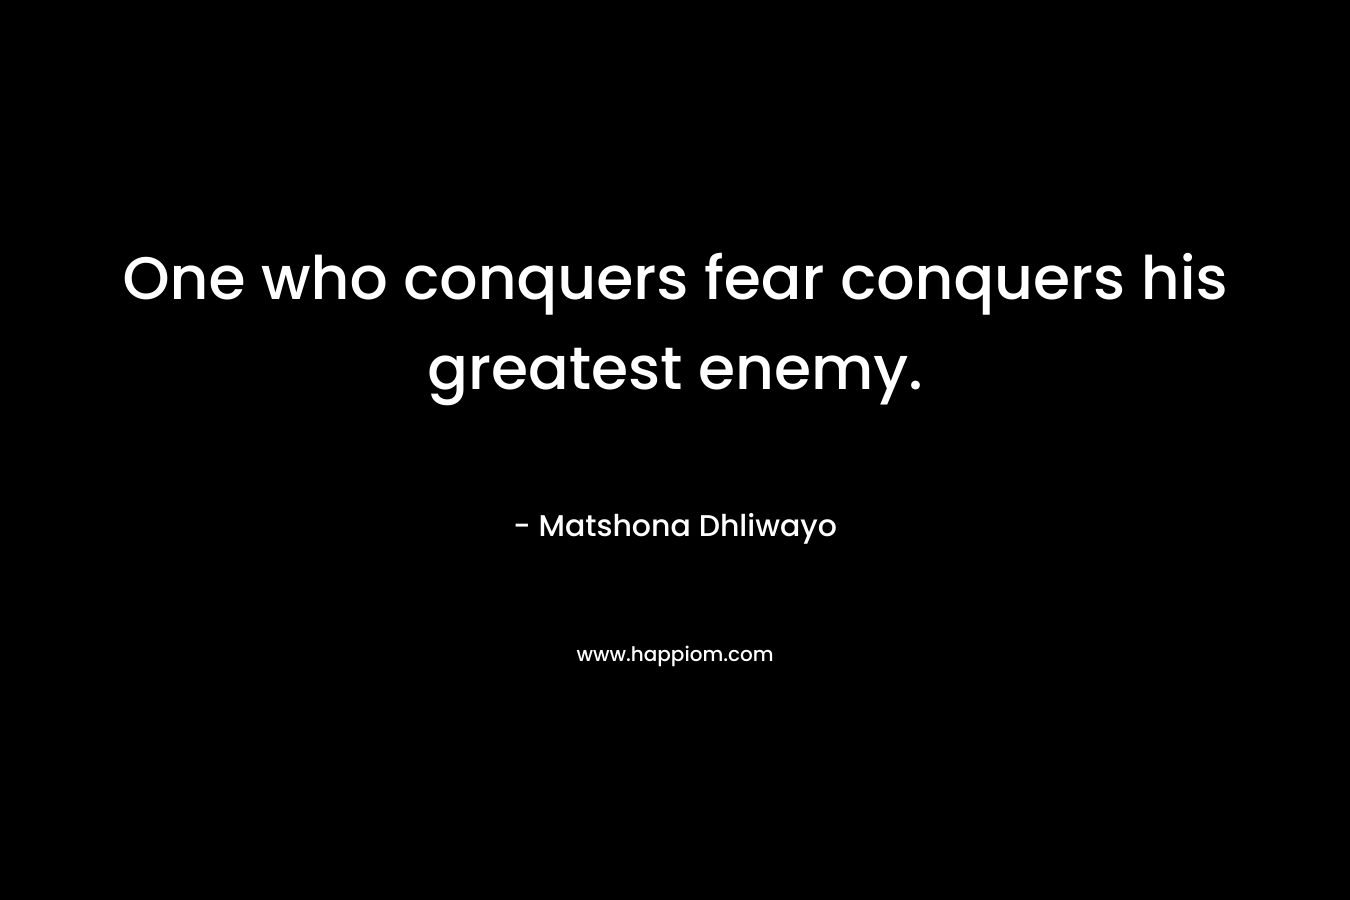 One who conquers fear conquers his greatest enemy.